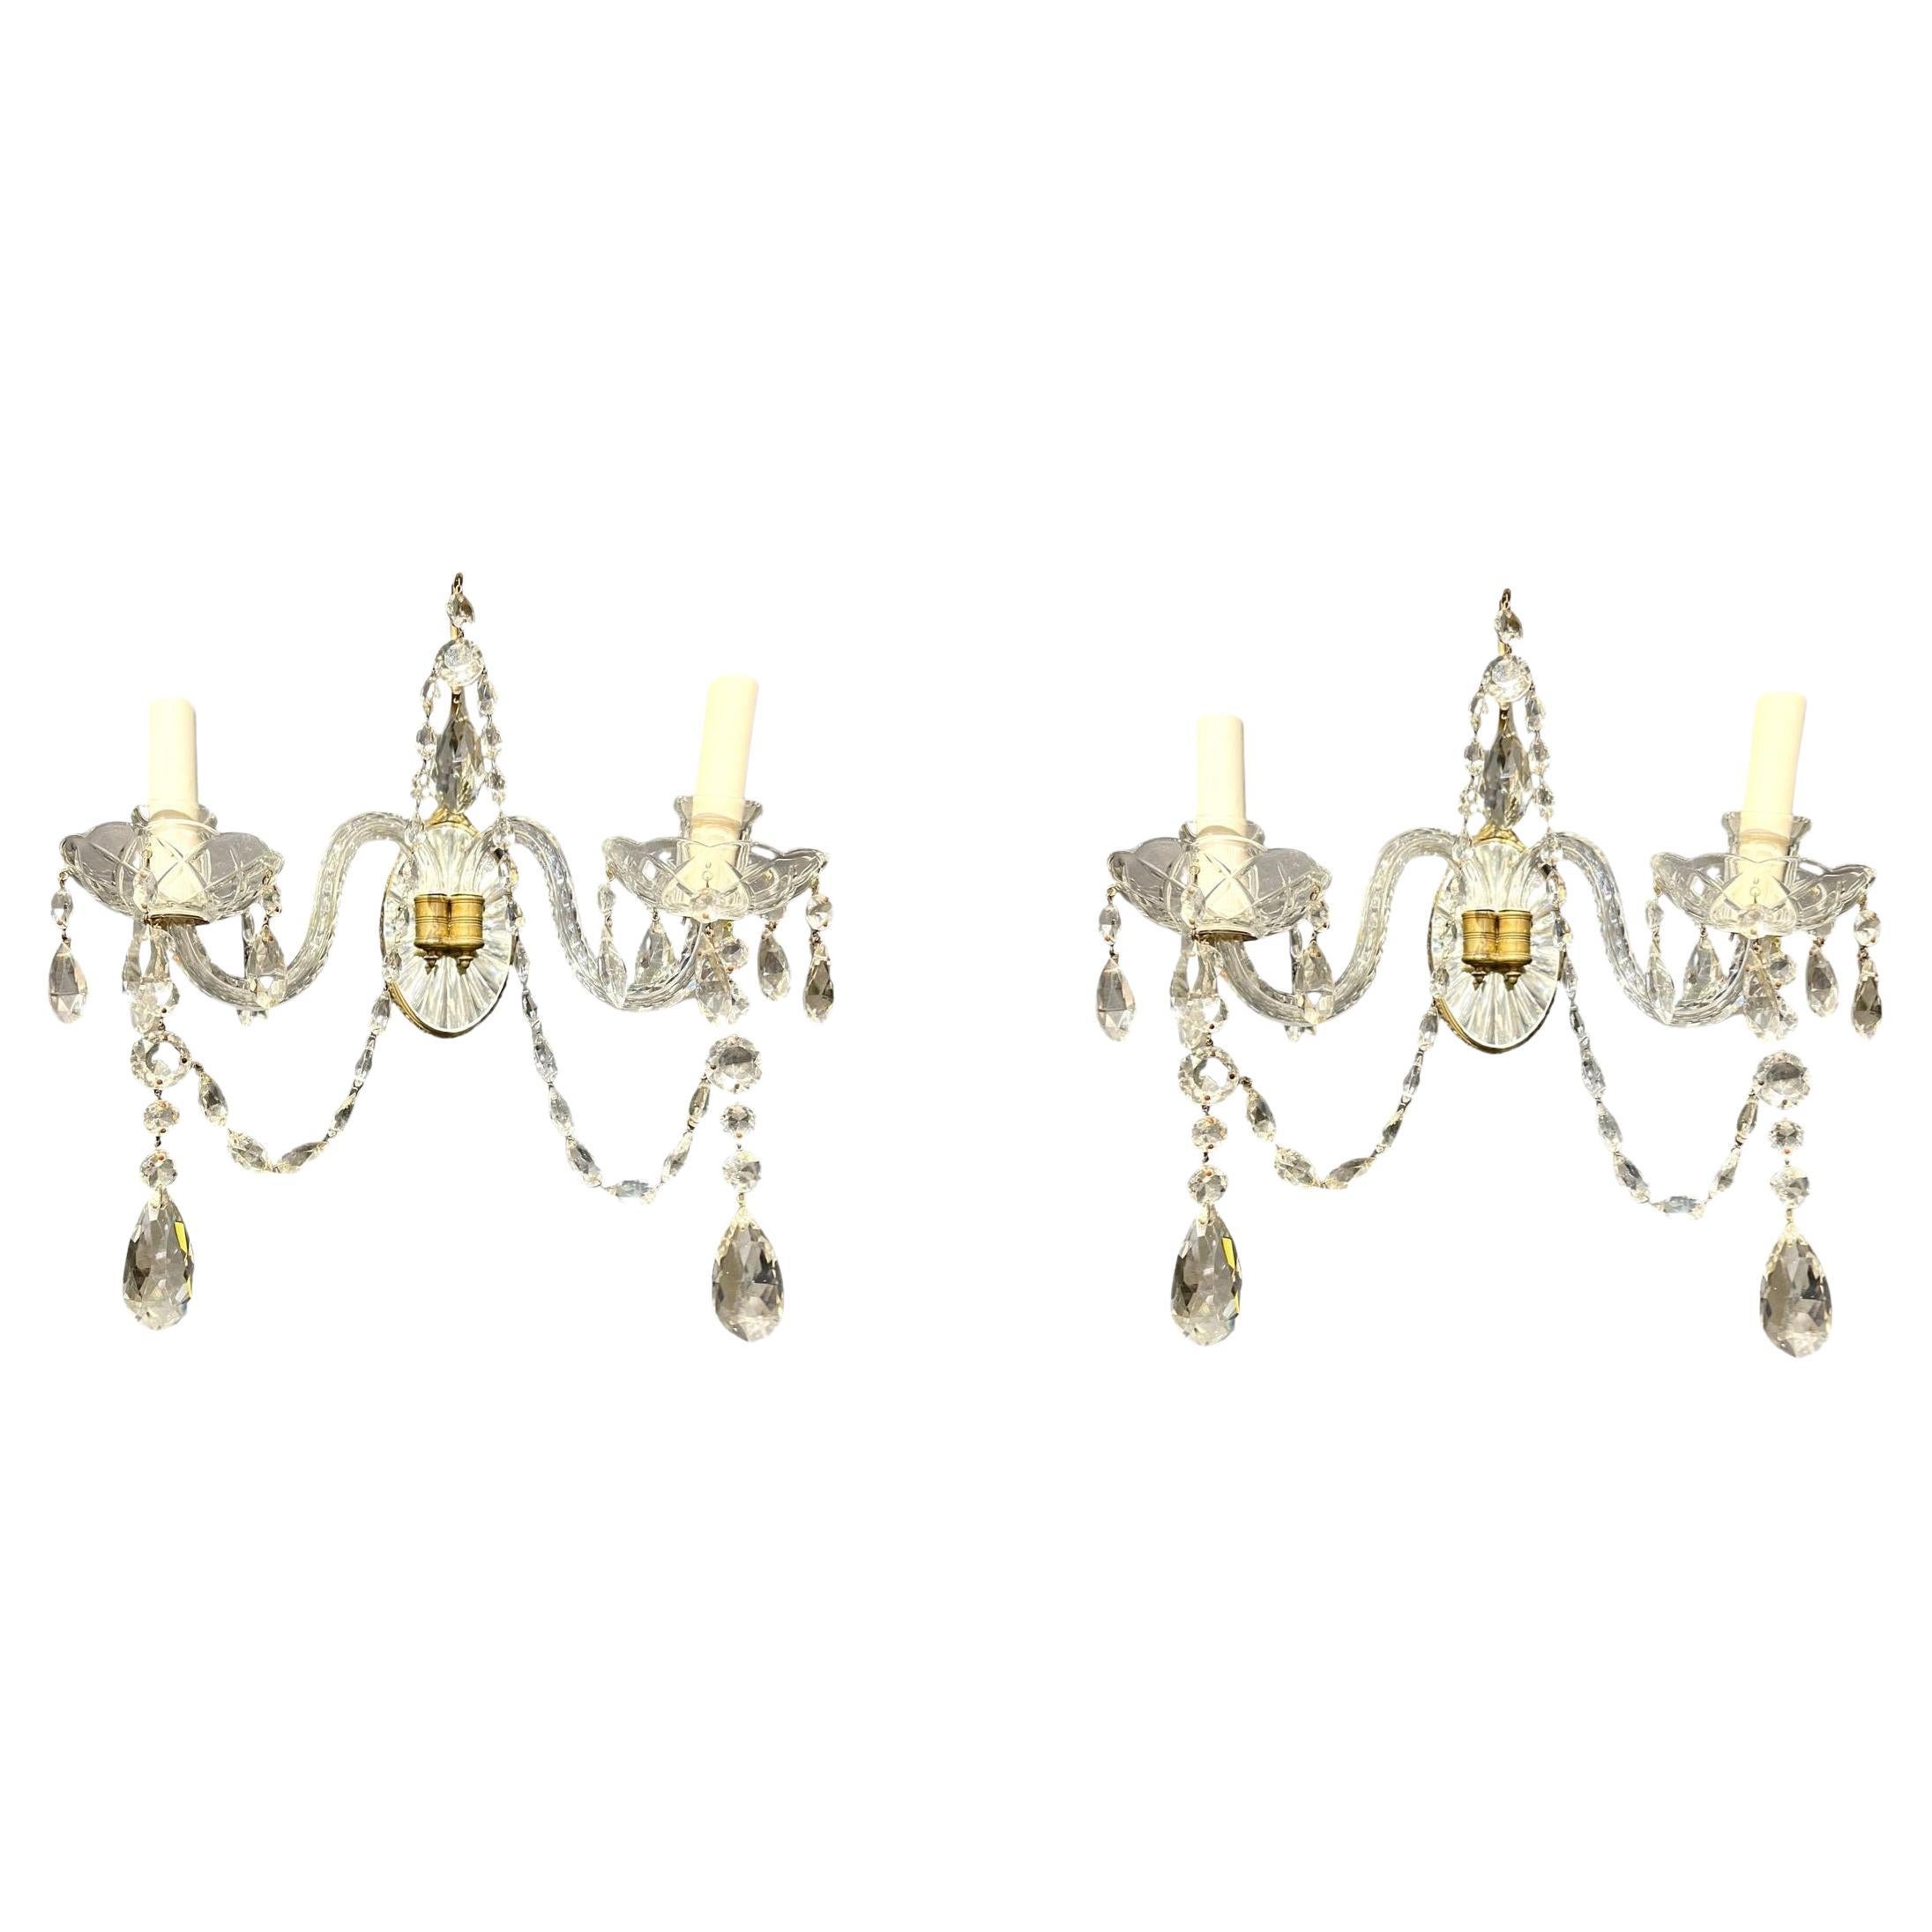 1920 Mirror and Crystal Glass 2 Lights Sconces For Sale